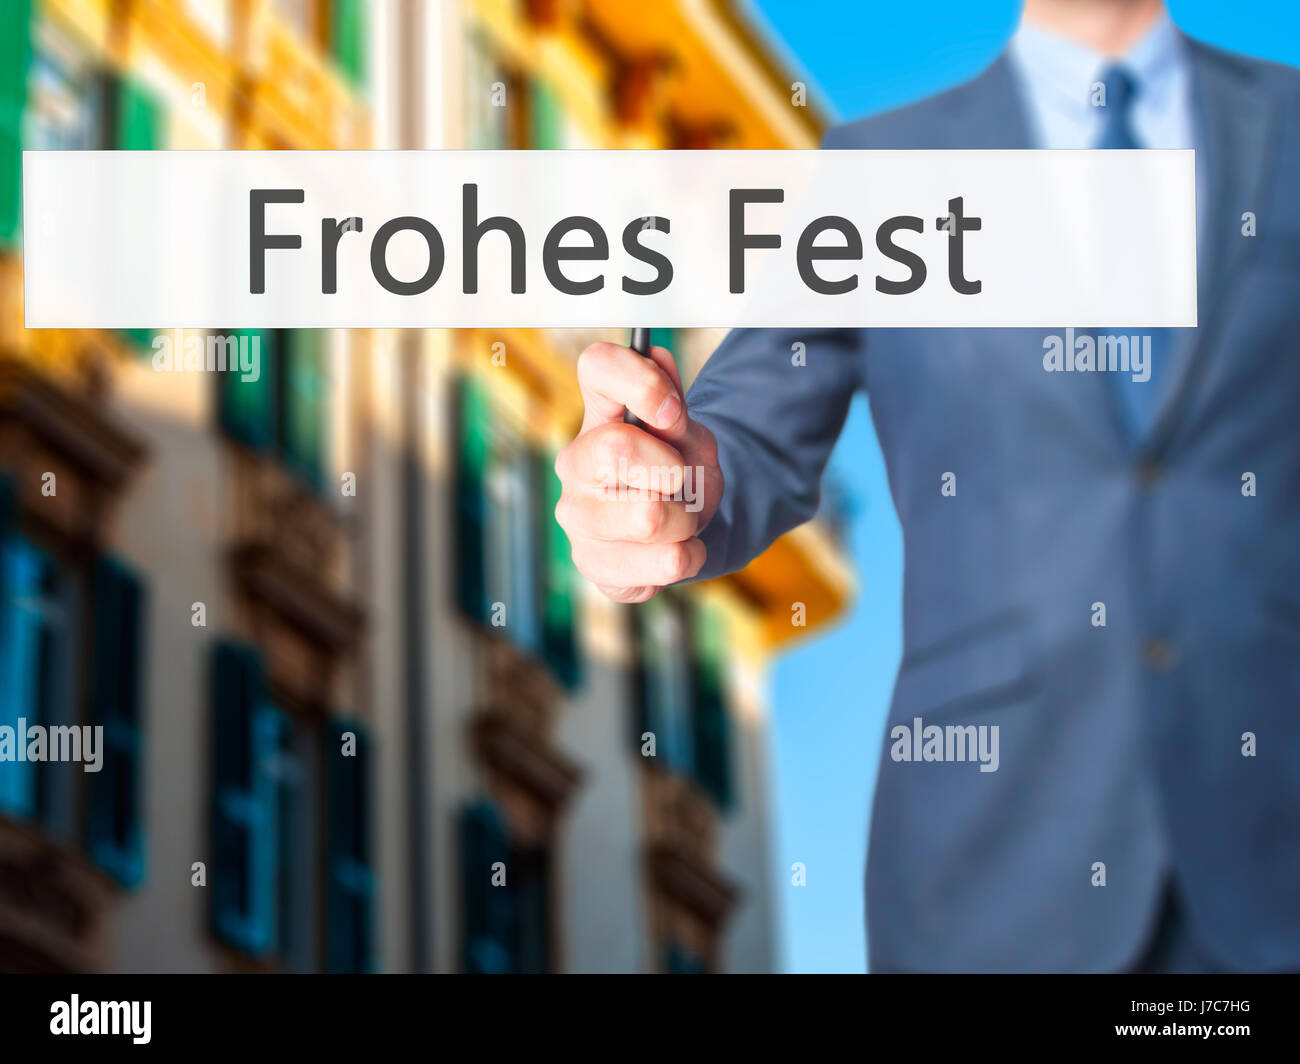 frohes fest (Happy Christmas in German) - Businessman hand holding sign. Business, technology, internet concept. Stock Photo Stock Photo